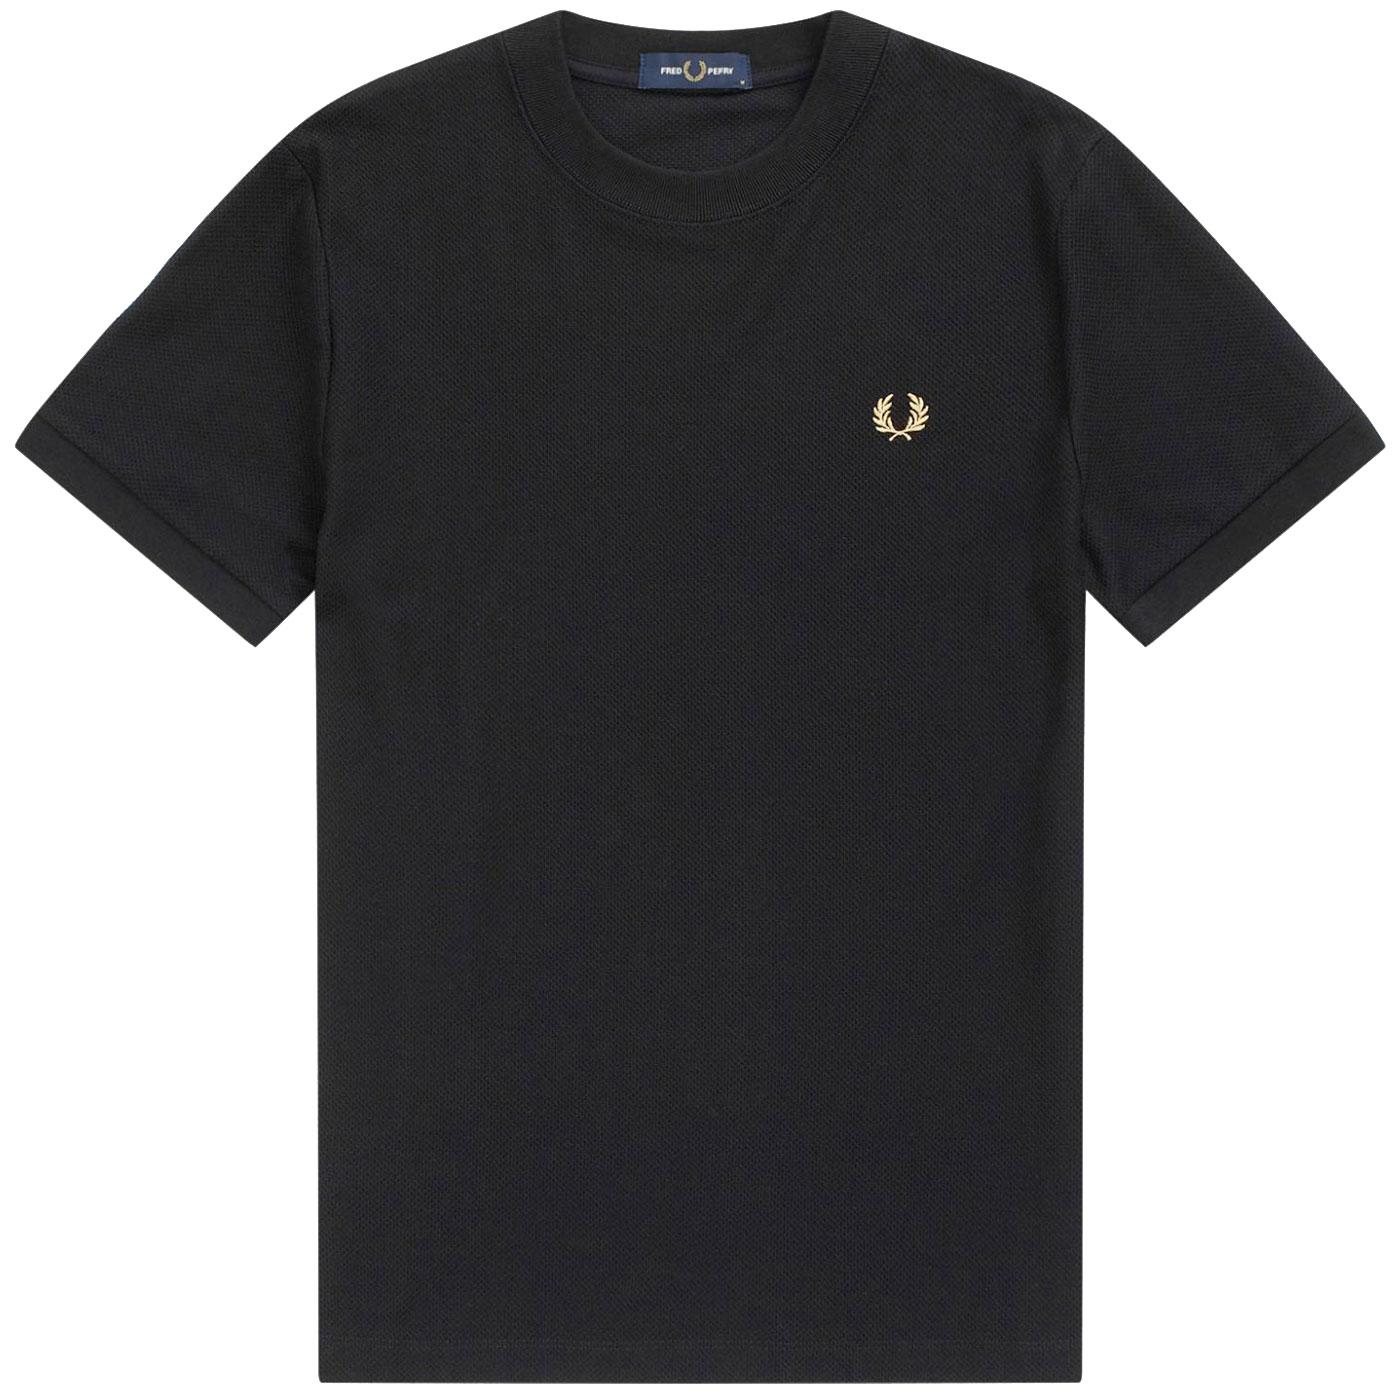 FRED PERRY Crew Neck Pique Texture T-Shirt BLACK